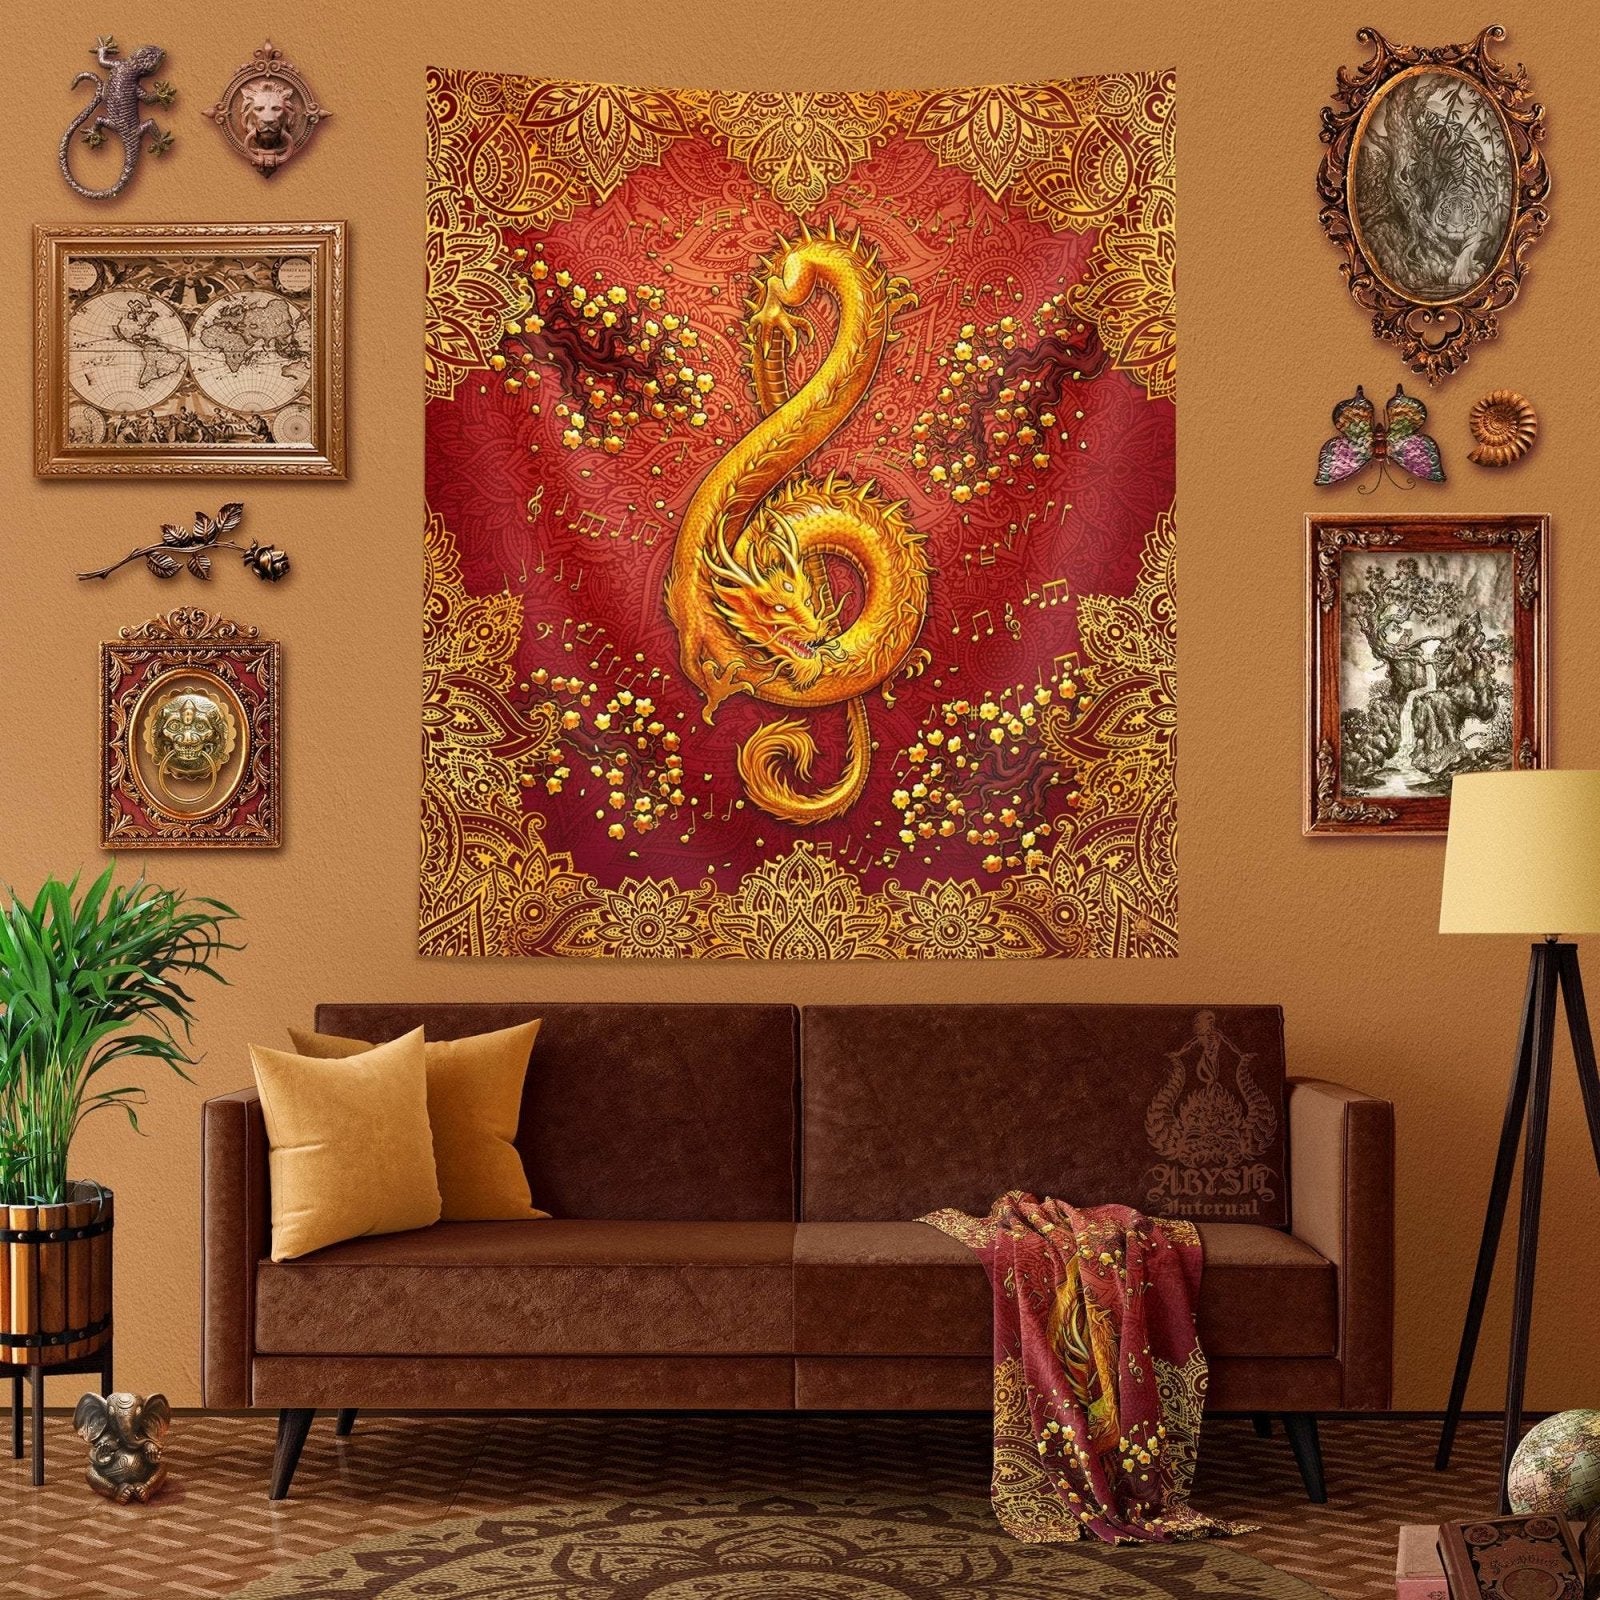 Boho Tapestry, Music Wall Hanging, Indie and Hippie Home Decor, Art Print, Eclectic and Funky - Gold Dragon, Mandalas, Treble Clef - Abysm Internal